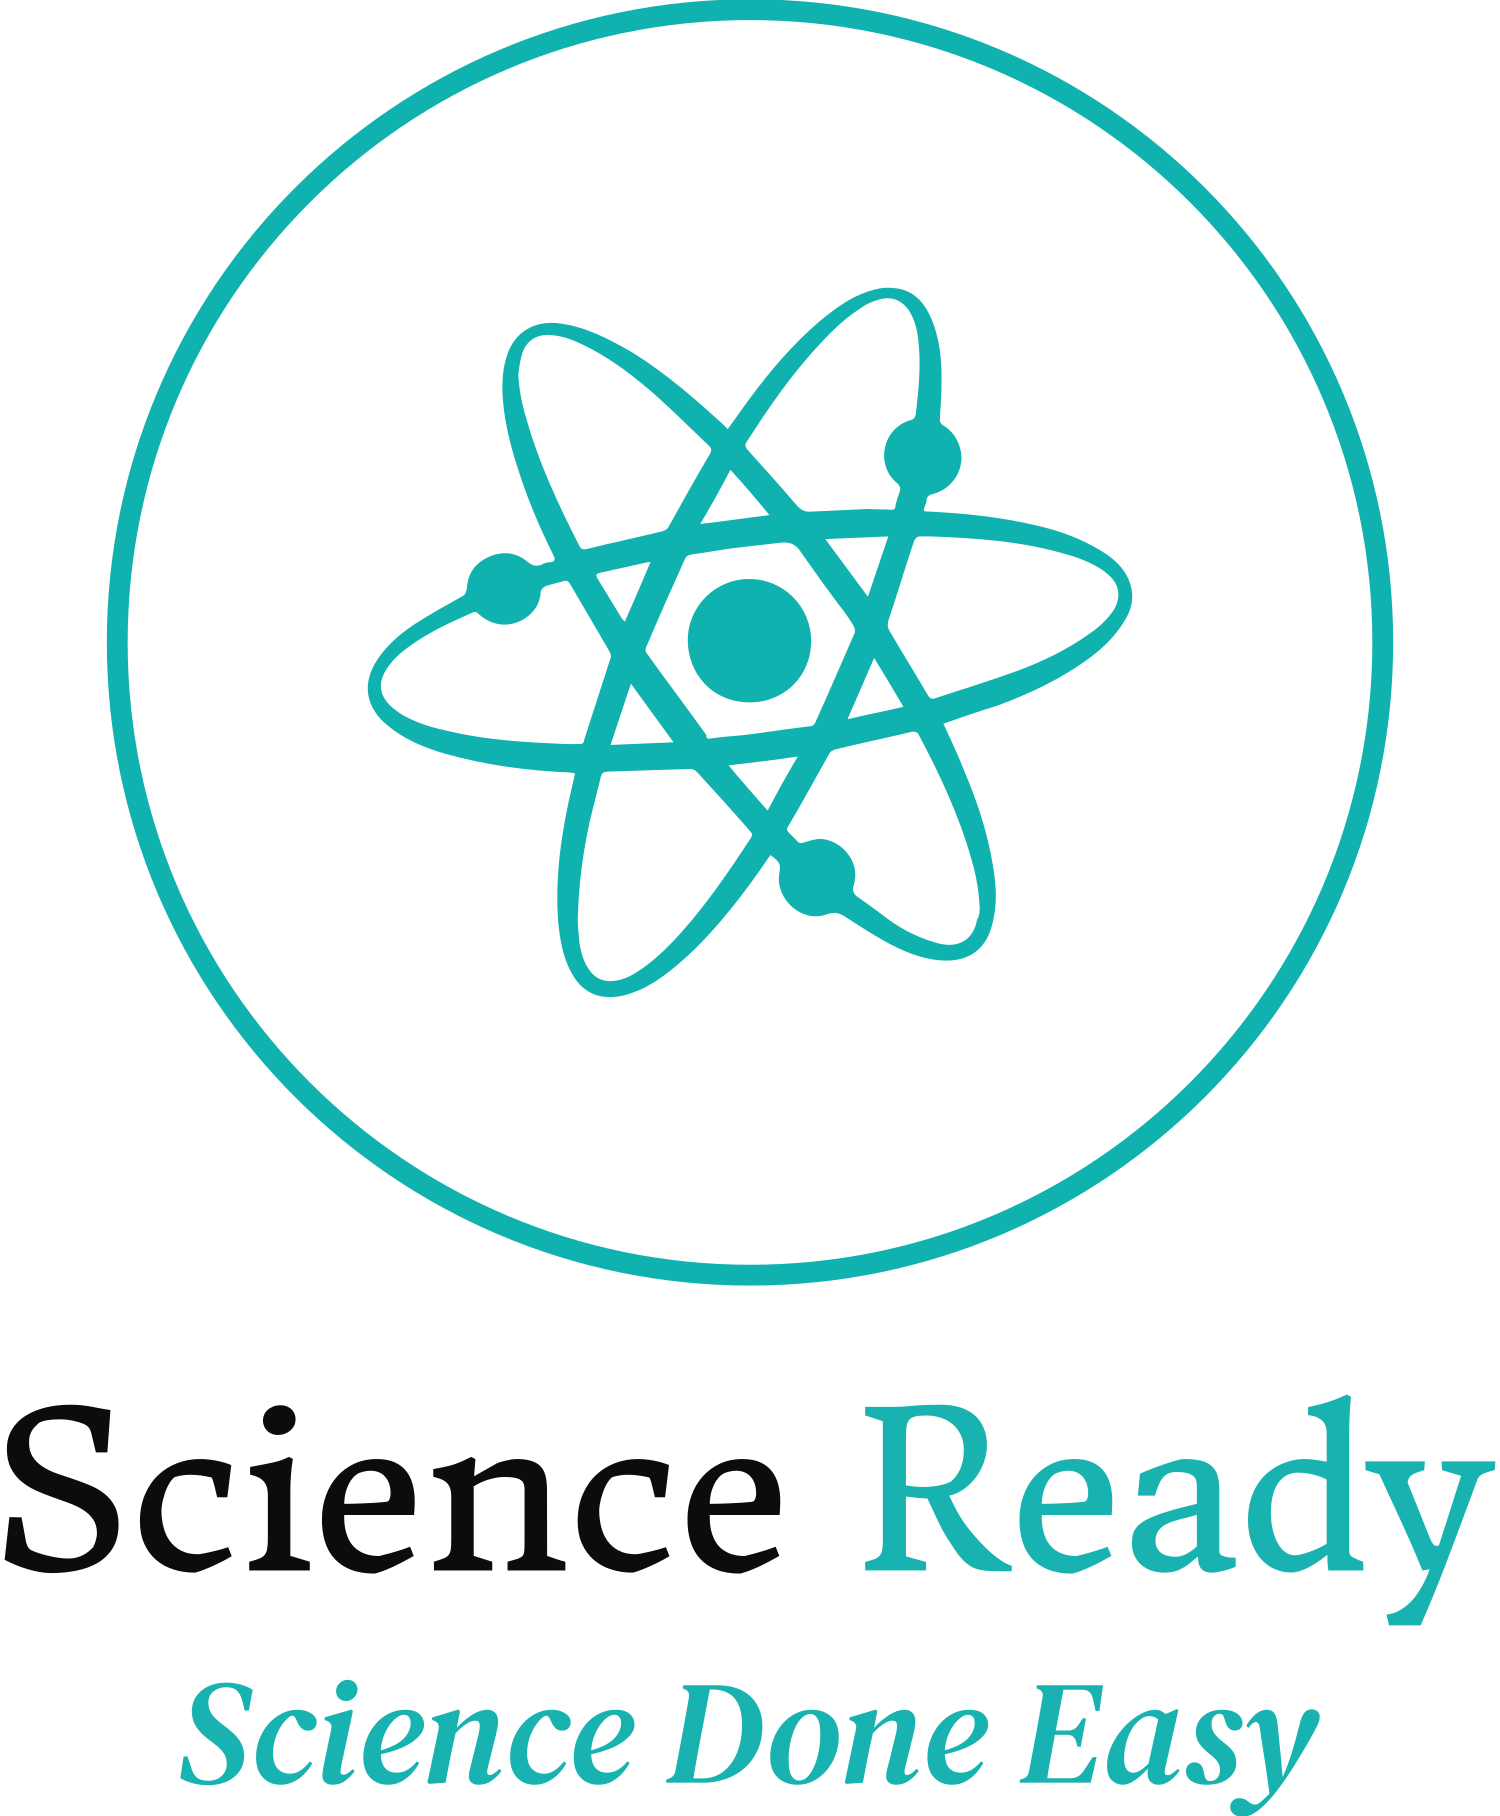 SCIENCEREADY.ORG